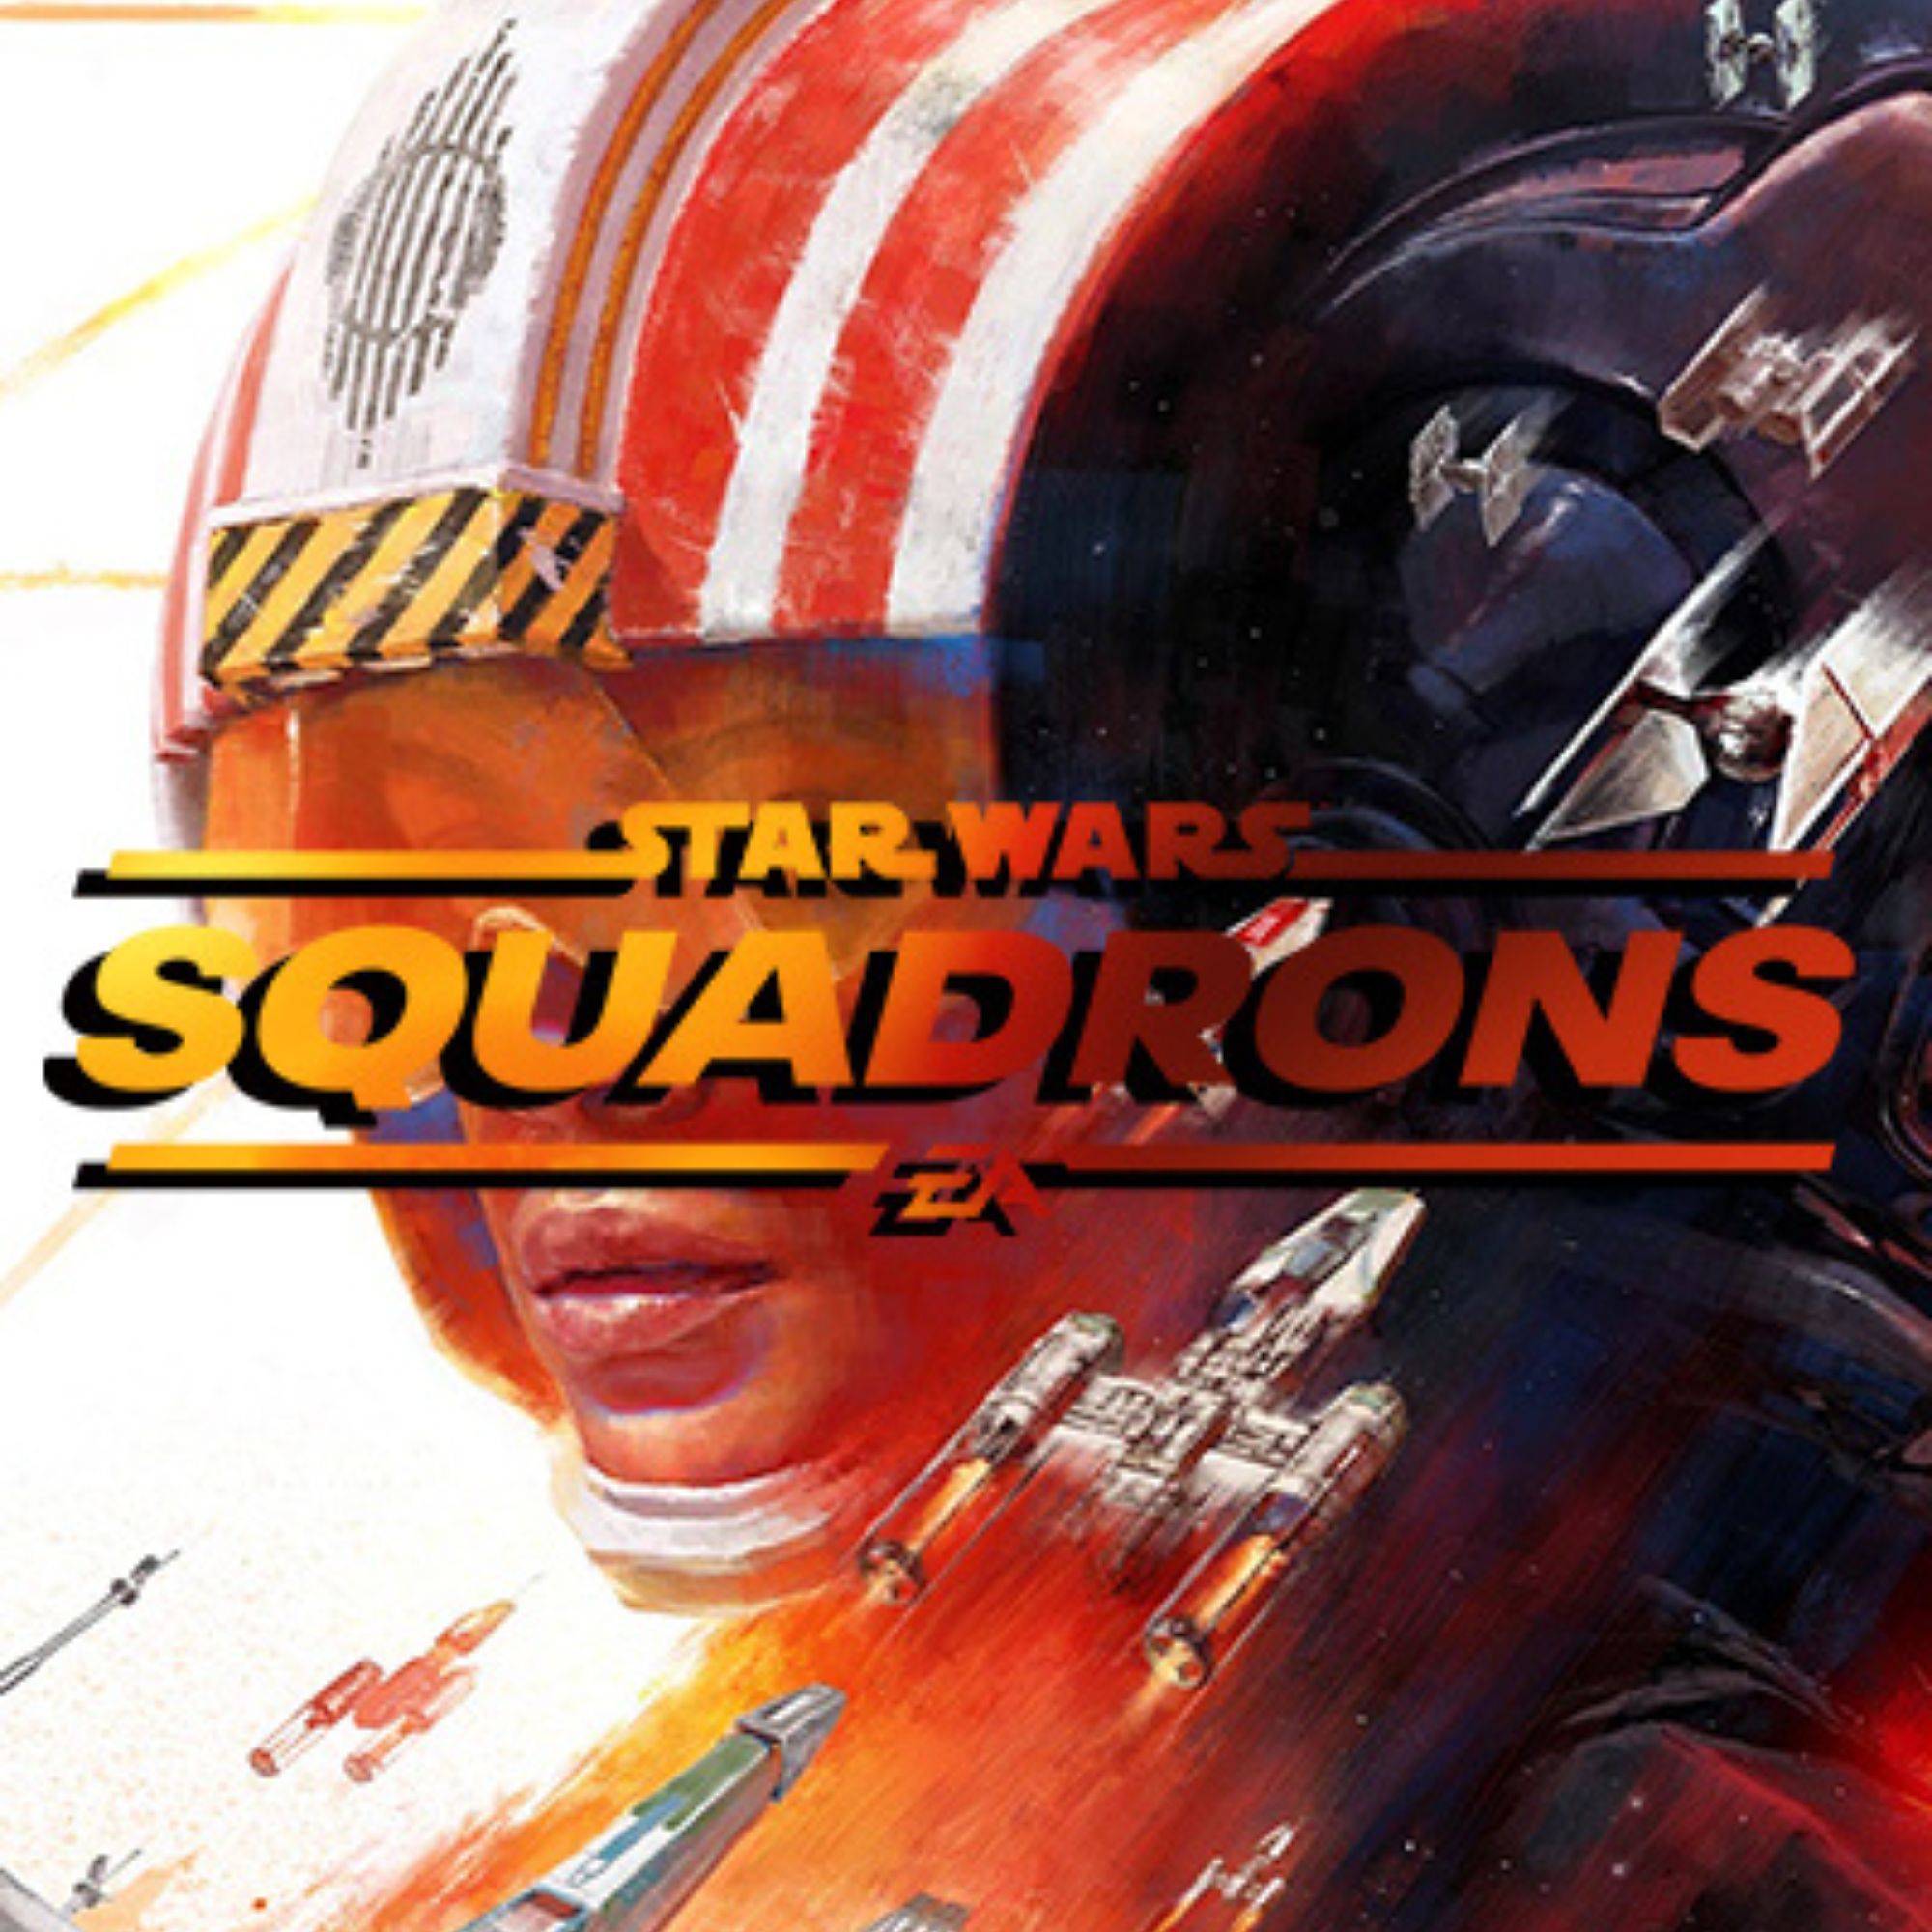 2000x2000 tag image for Star Wars Squadrons. The game's orange logo is pressed against a tie fighter pilot's face.